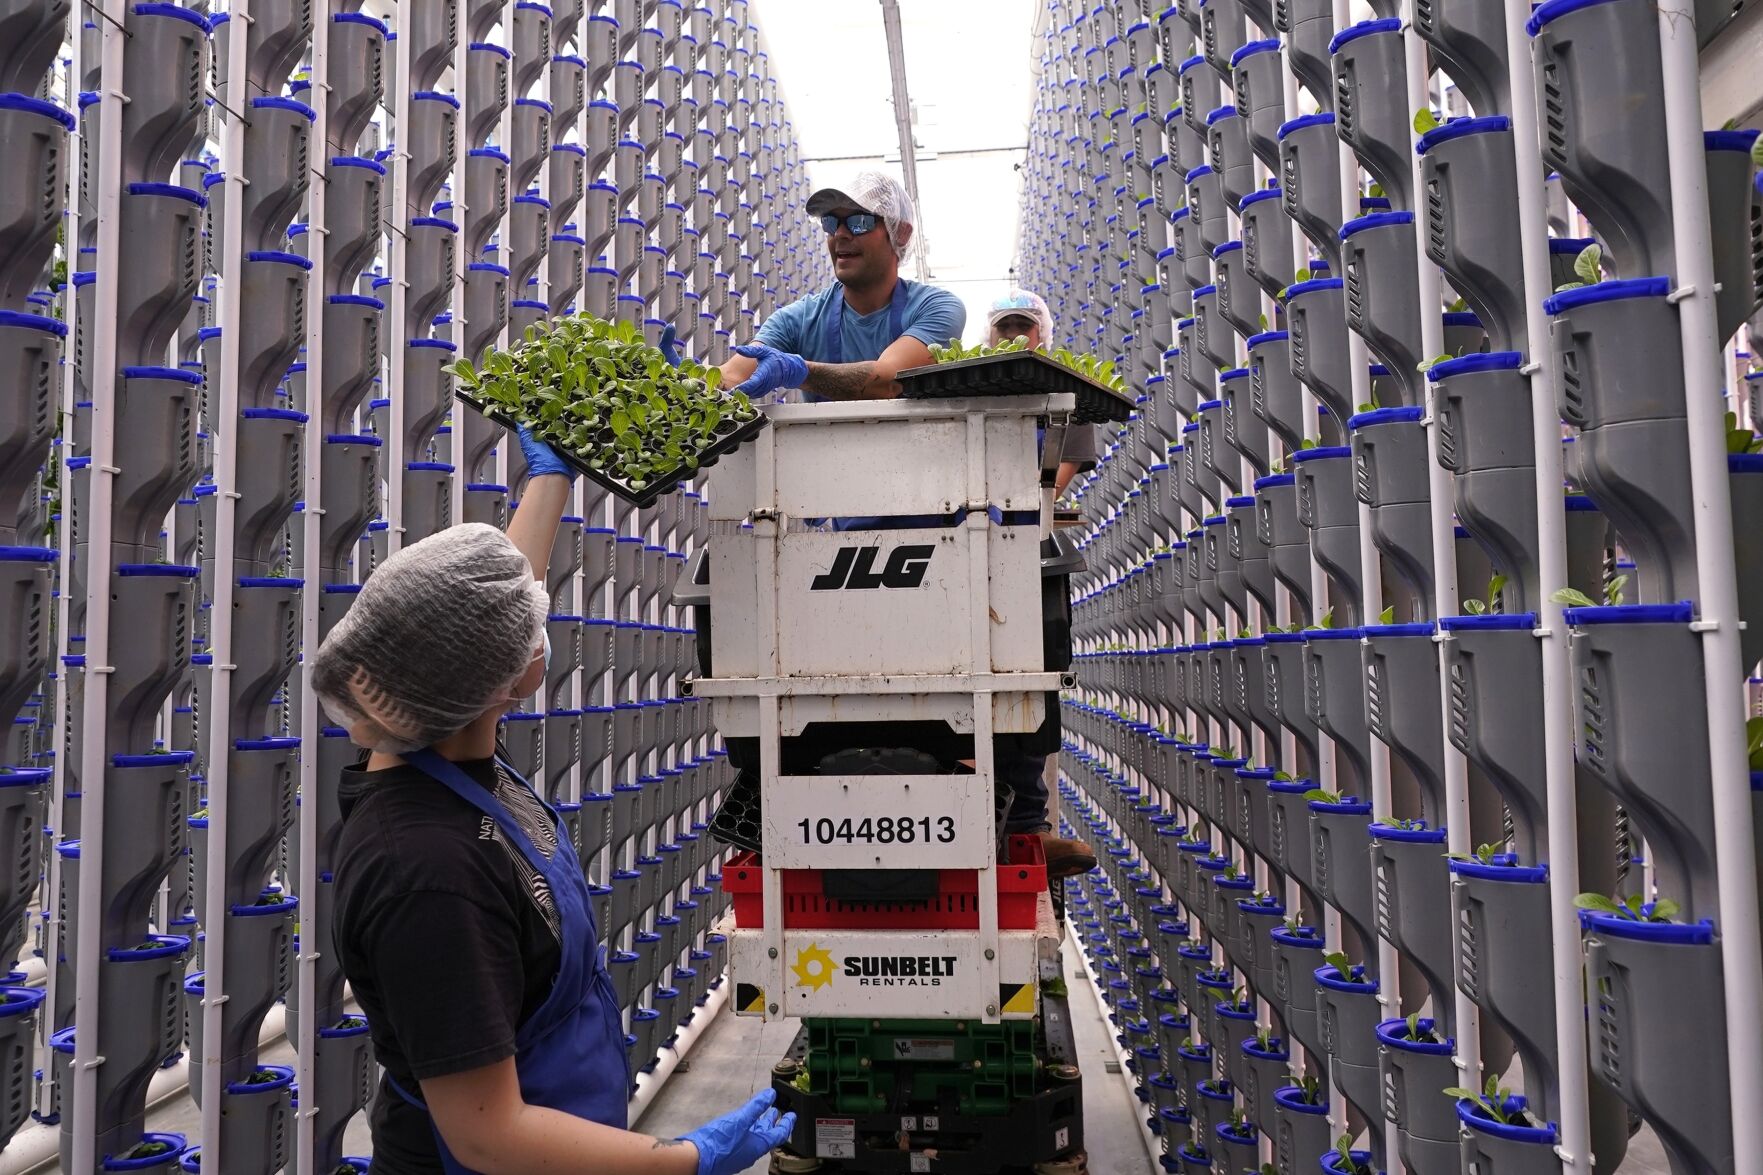 <p>Workers hand off plants during operations at a vertical farm greenhouse in Cleburne, Texas, Aug. 29, 2023. Indoor farming brings growing inside in what experts sometimes call “controlled environment agriculture.” There are different methods; vertical farming involves stacking produce from floor to ceiling, often under artificial lights and with the plants growing in nutrient-enriched water. (AP Photo/LM Otero)</p>   PHOTO CREDIT: LM Otero